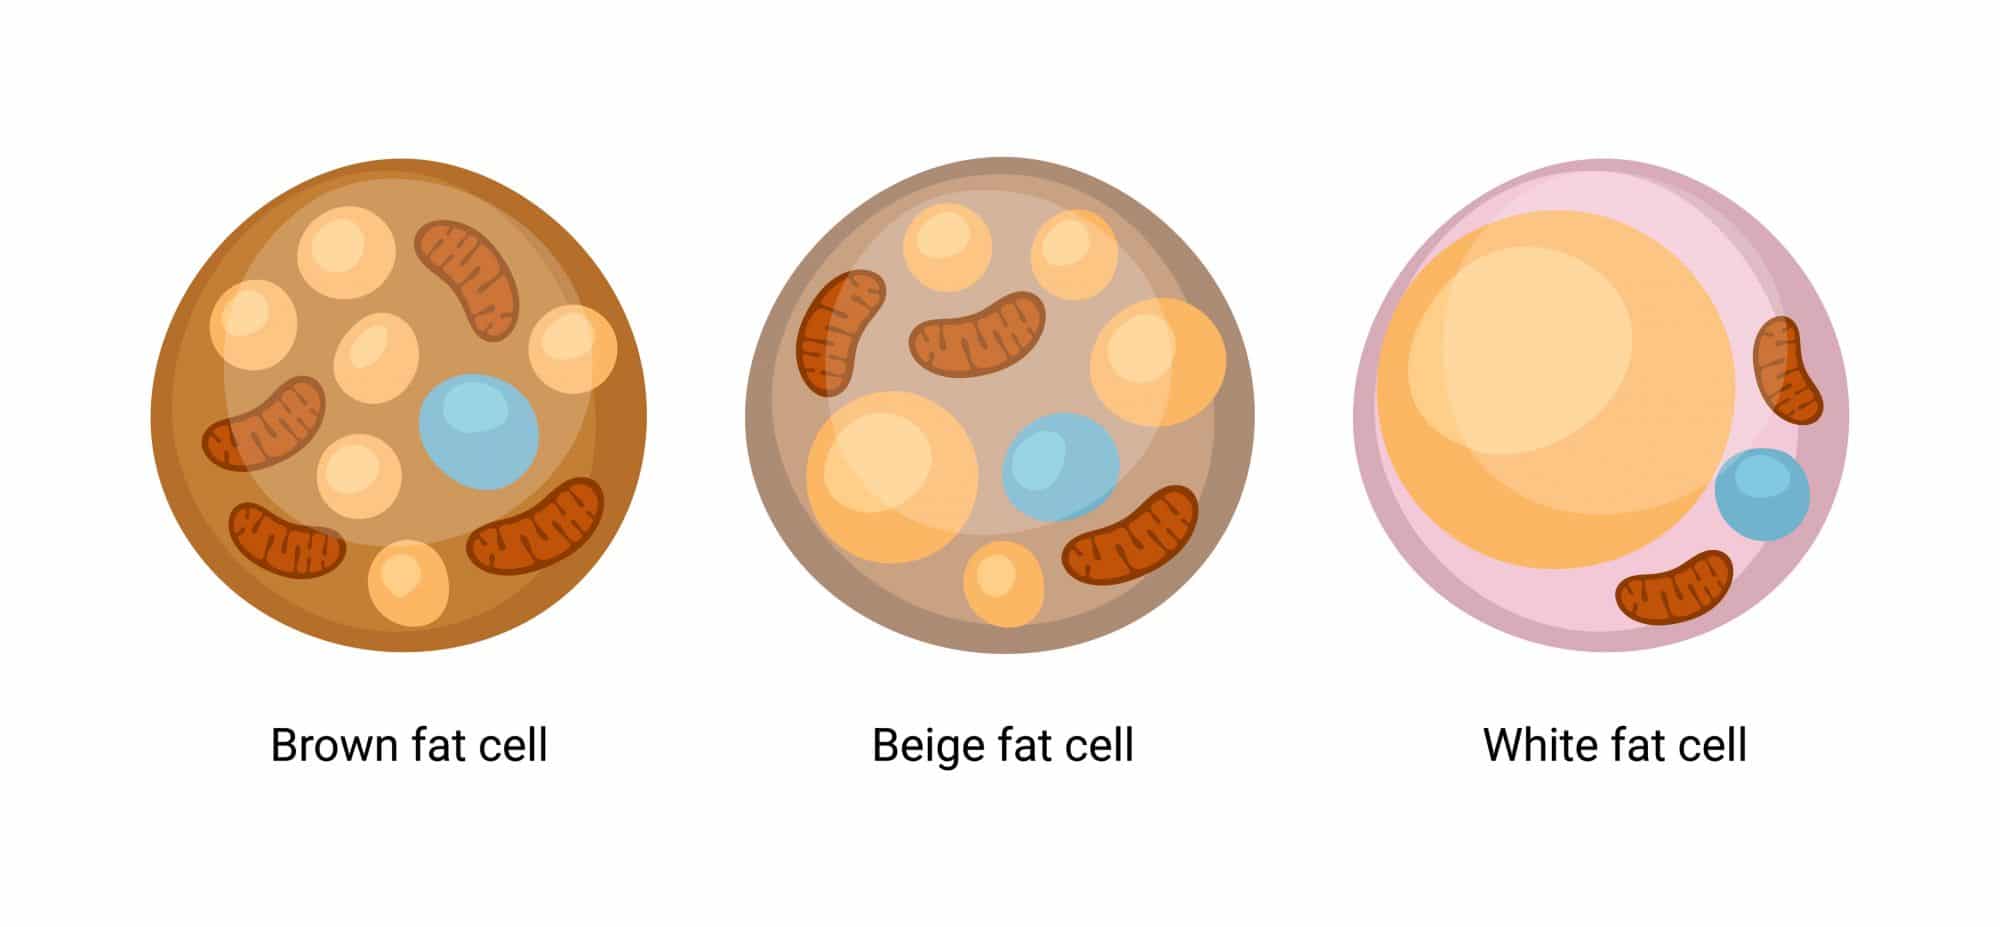 Brown fat cell - White fat cell - Beige fat cell